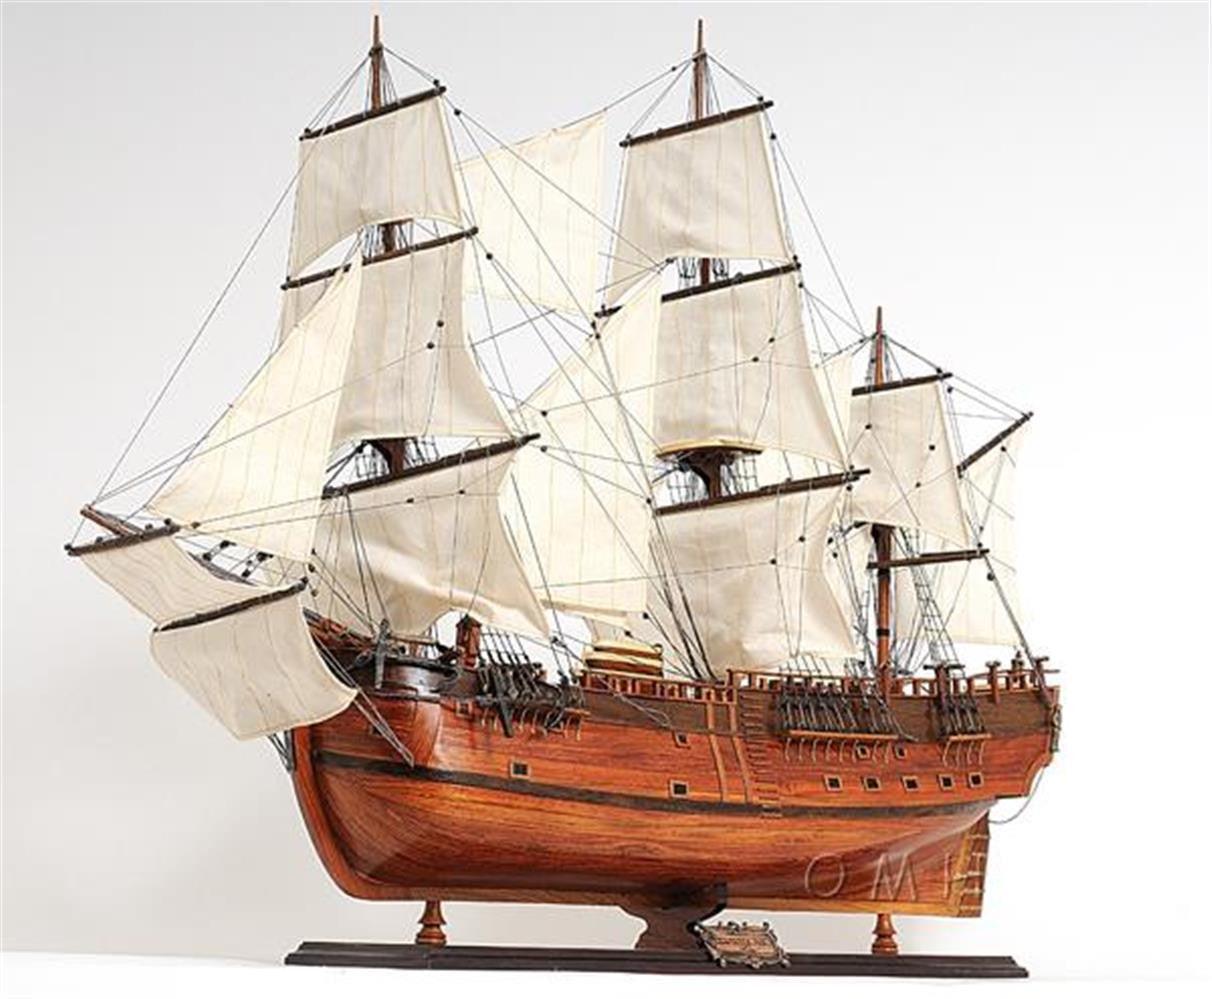 H.M.S Endeavour Handcrafted Wooden Model Ship 38 " Long - Medieval Replicas